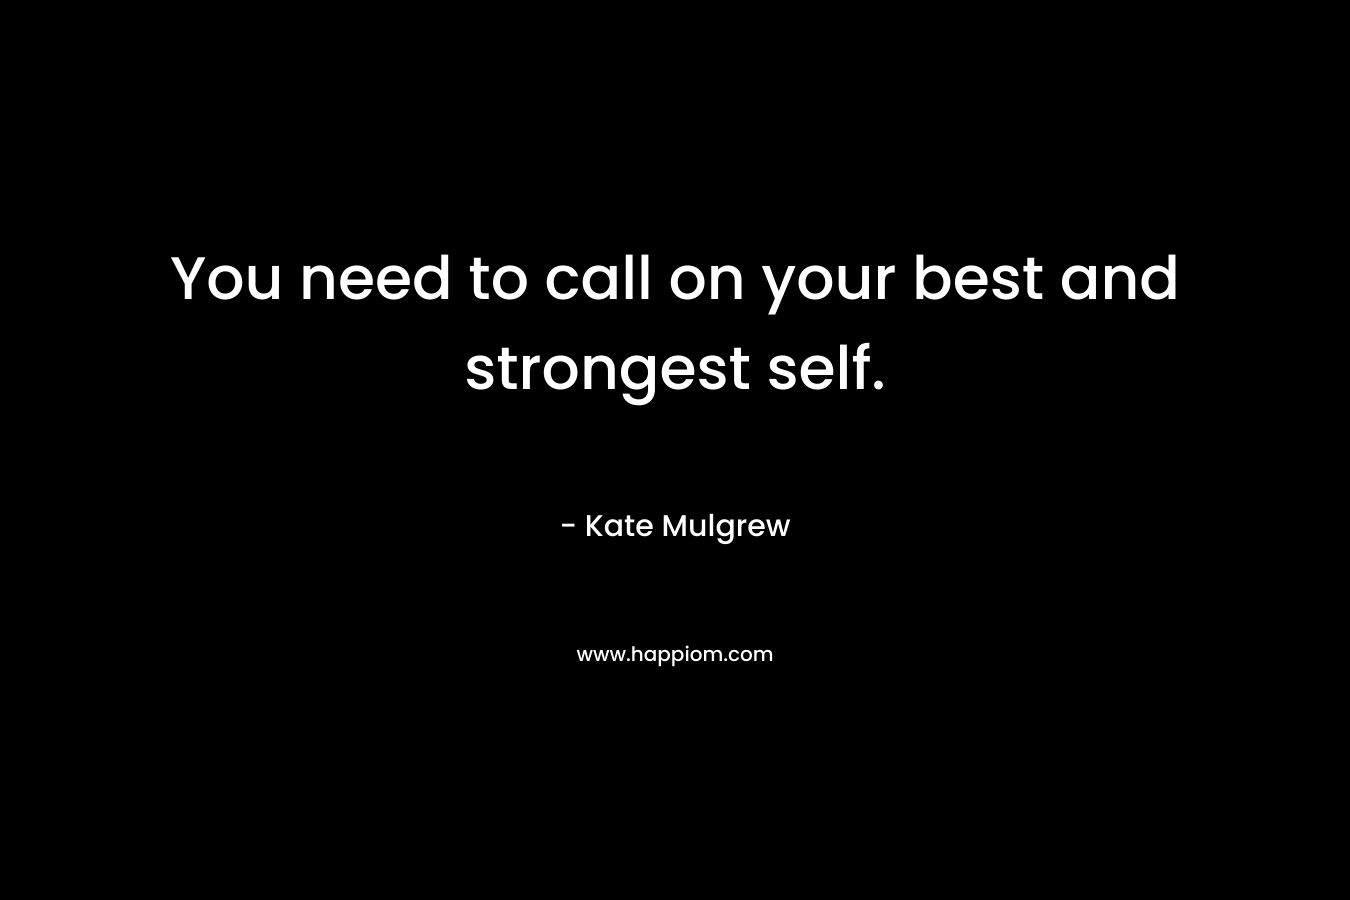 You need to call on your best and strongest self.